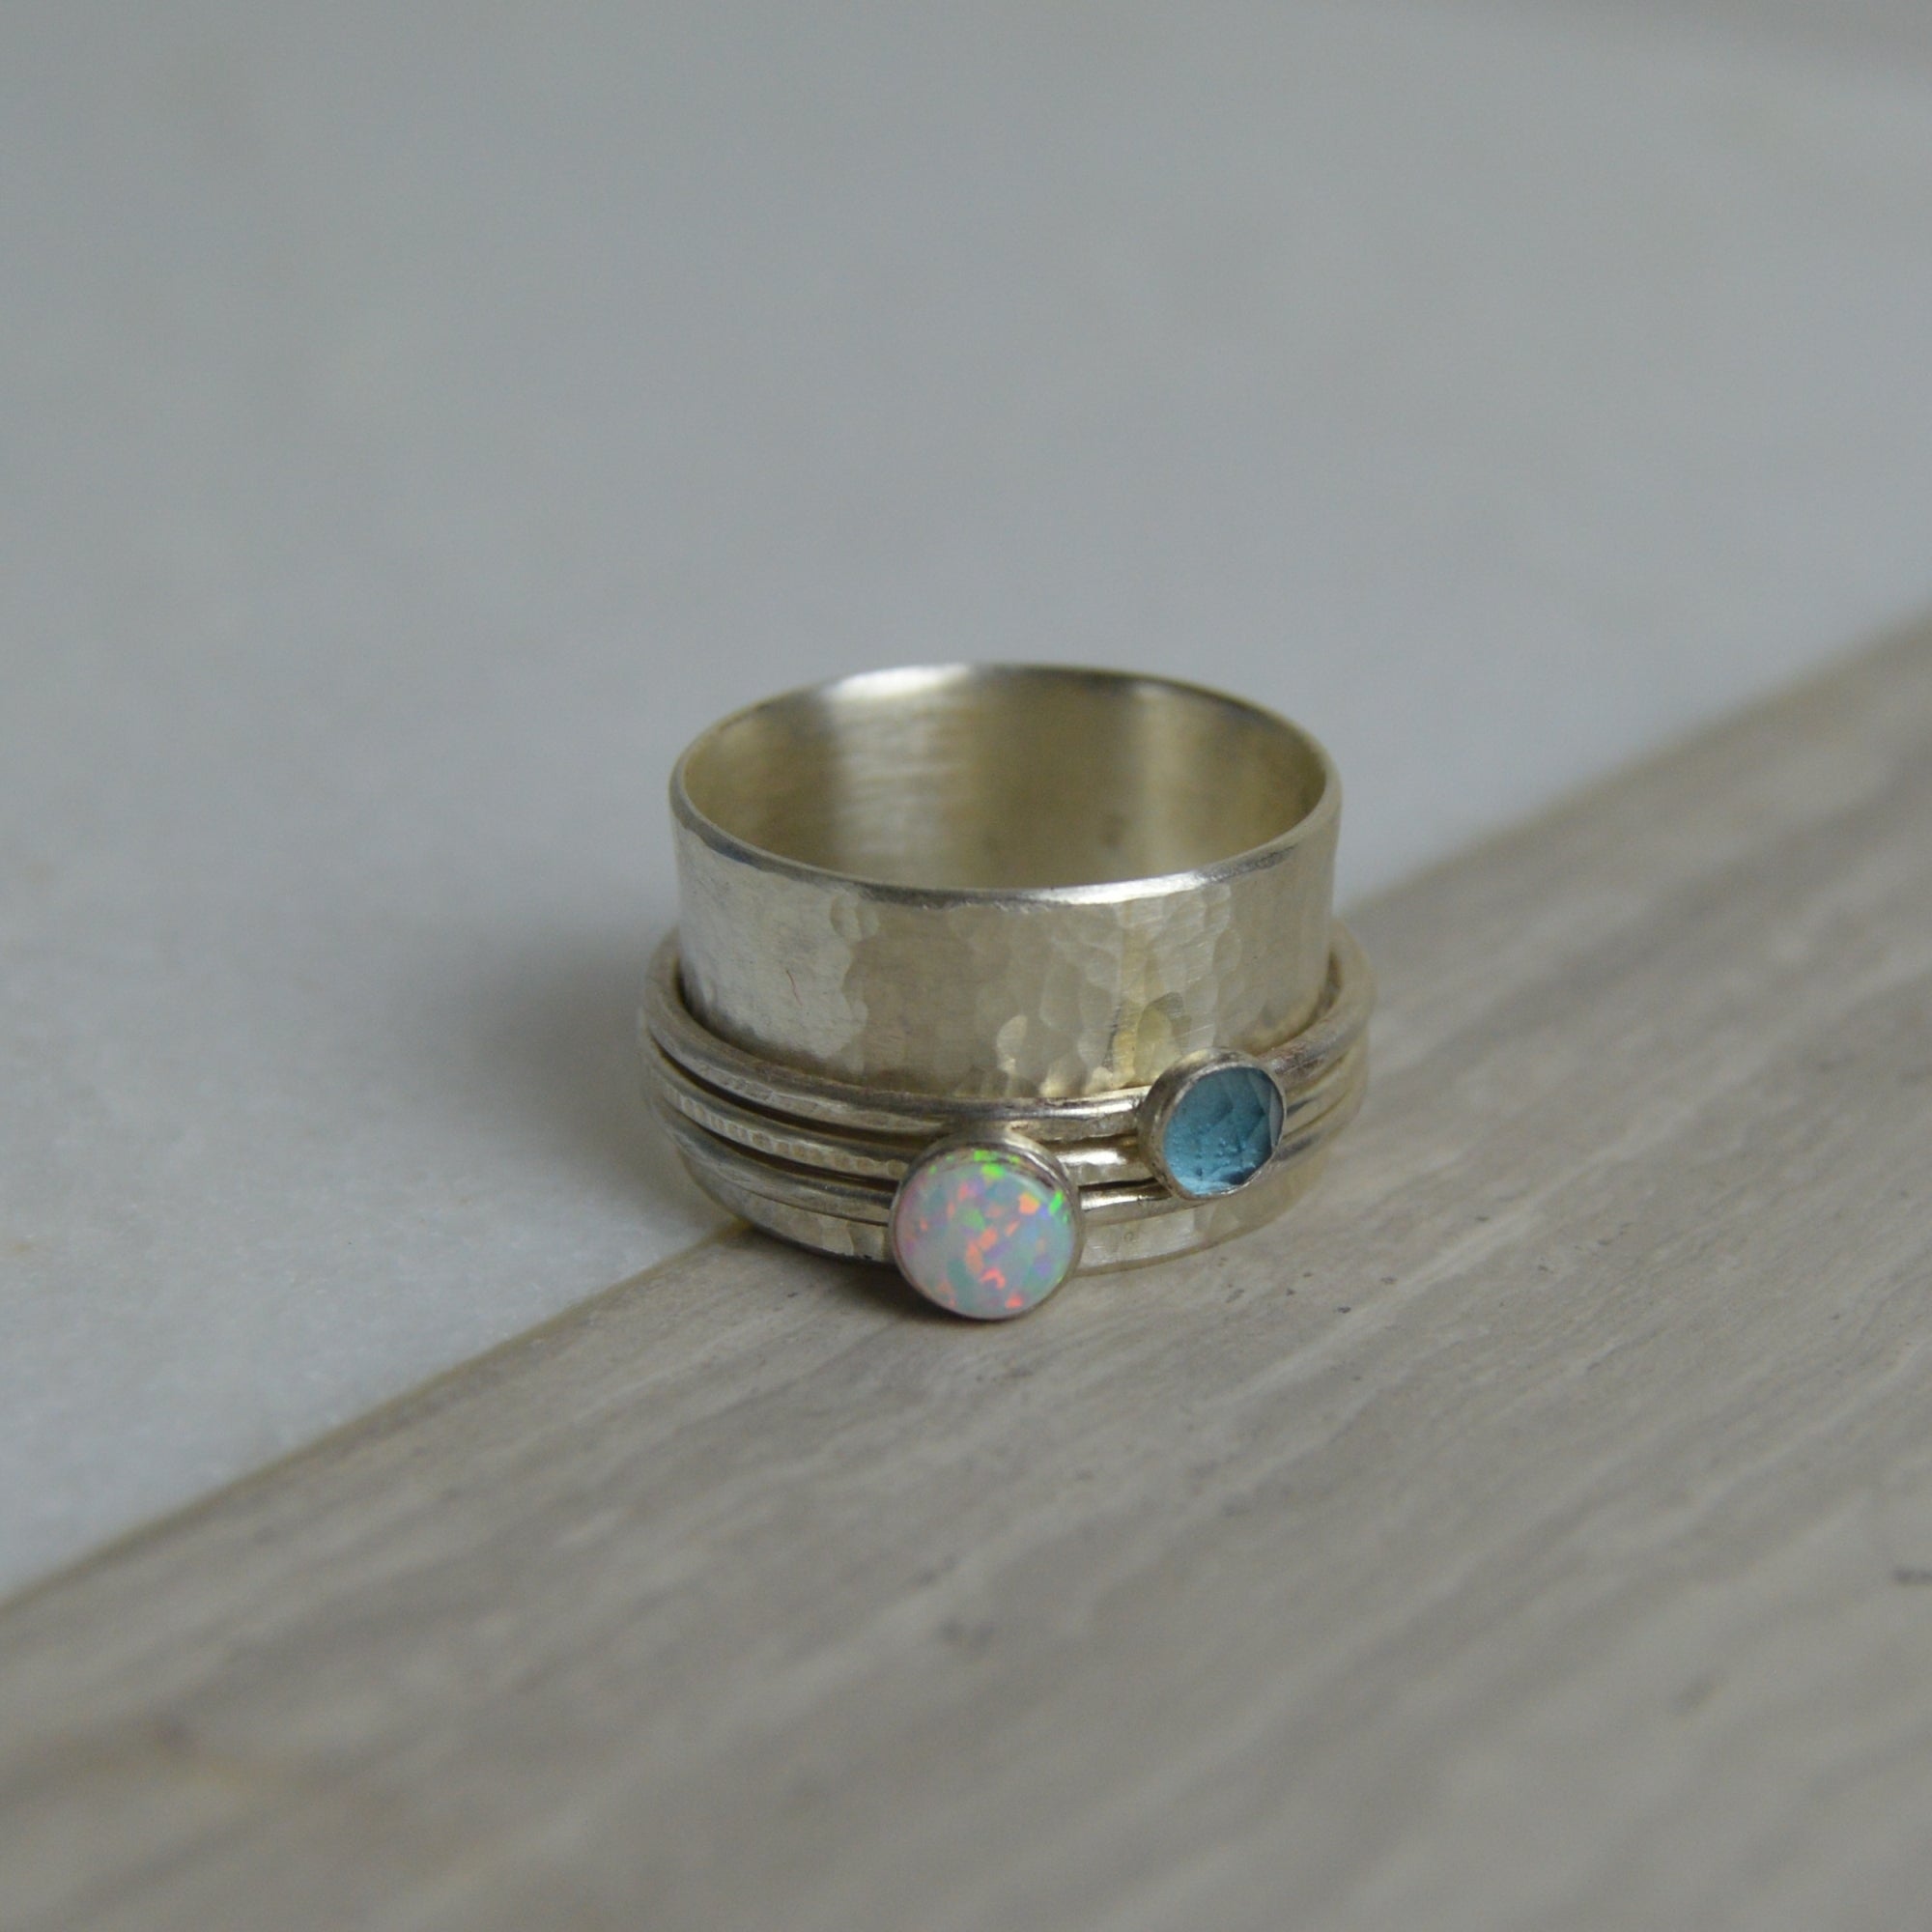 Opal & Topaz Spinning Ring - Made to order - The Nancy Smillie Shop - Art, Jewellery & Designer Gifts Glasgow